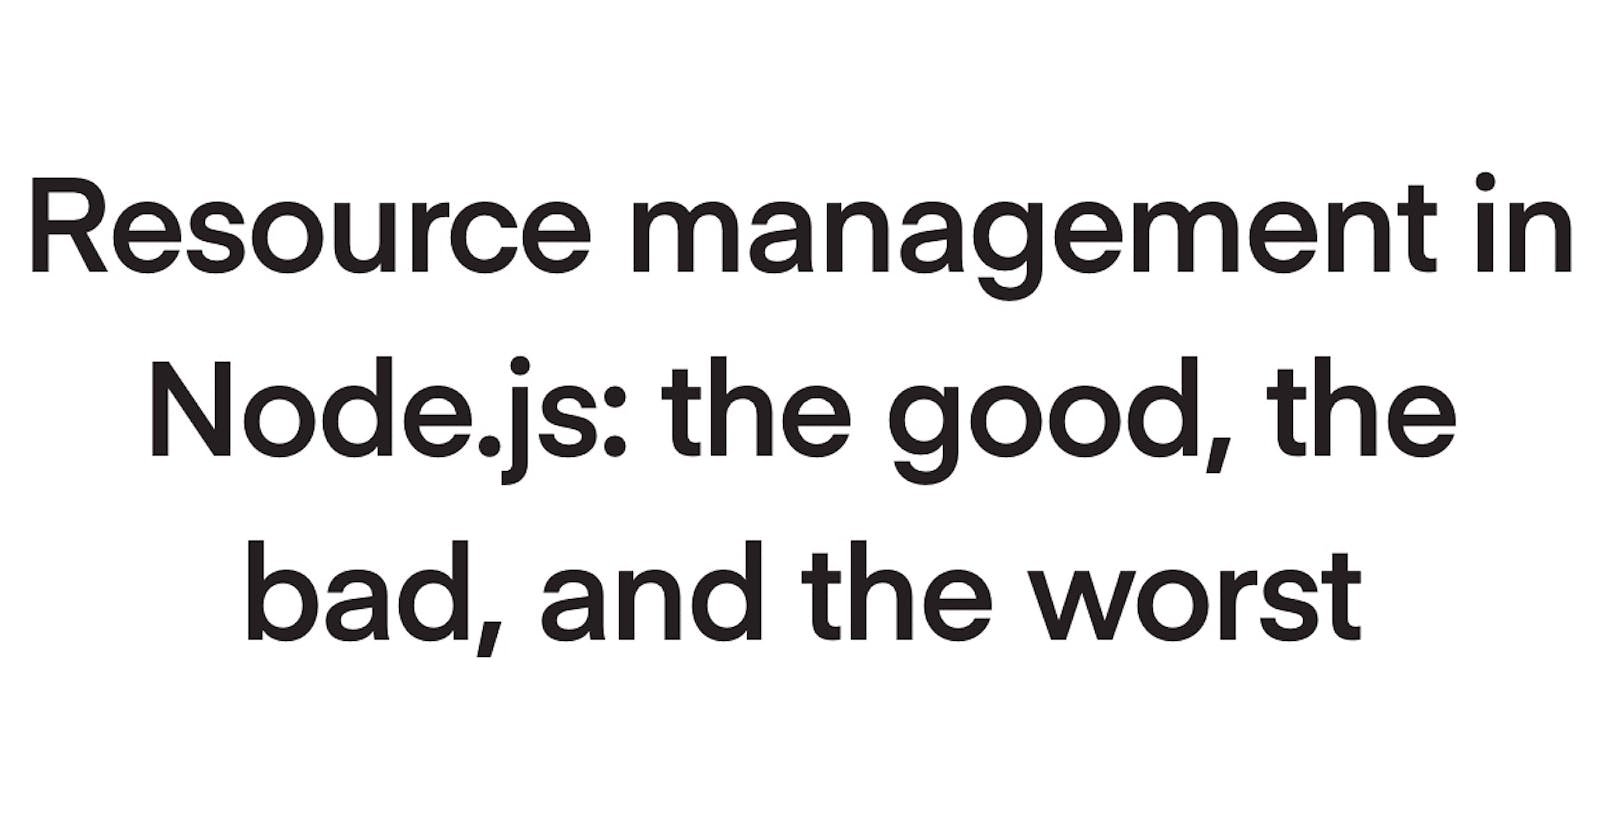 Resource management in Node.js: the good, the bad and the worst